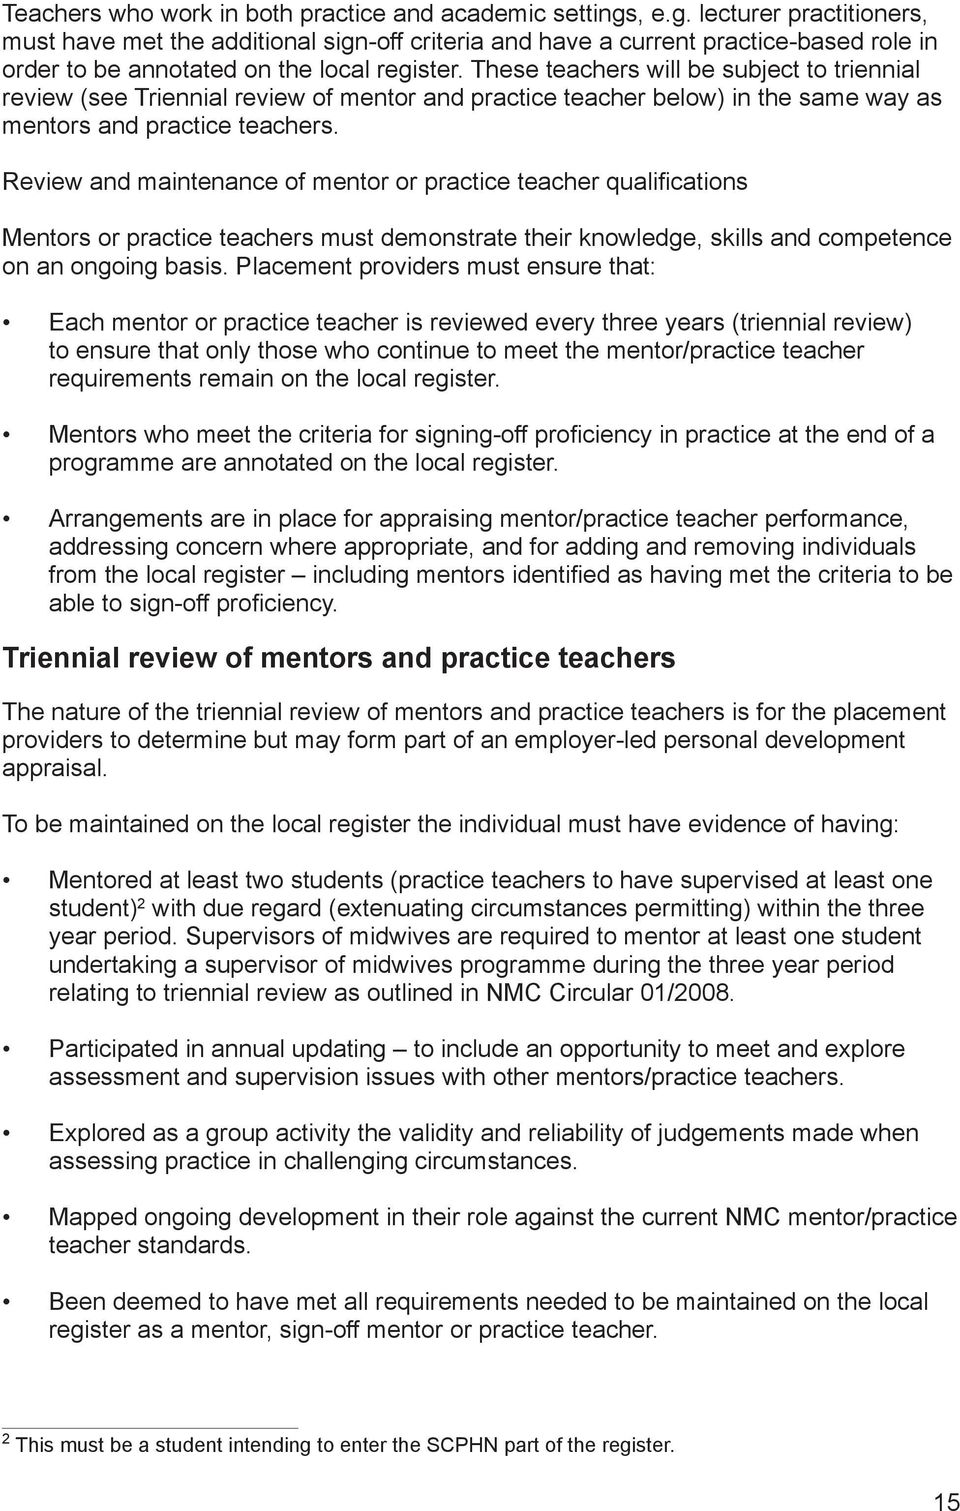 These teachers will be subject to triennial review (see Triennial review of mentor and practice teacher below) in the same way as mentors and practice teachers.